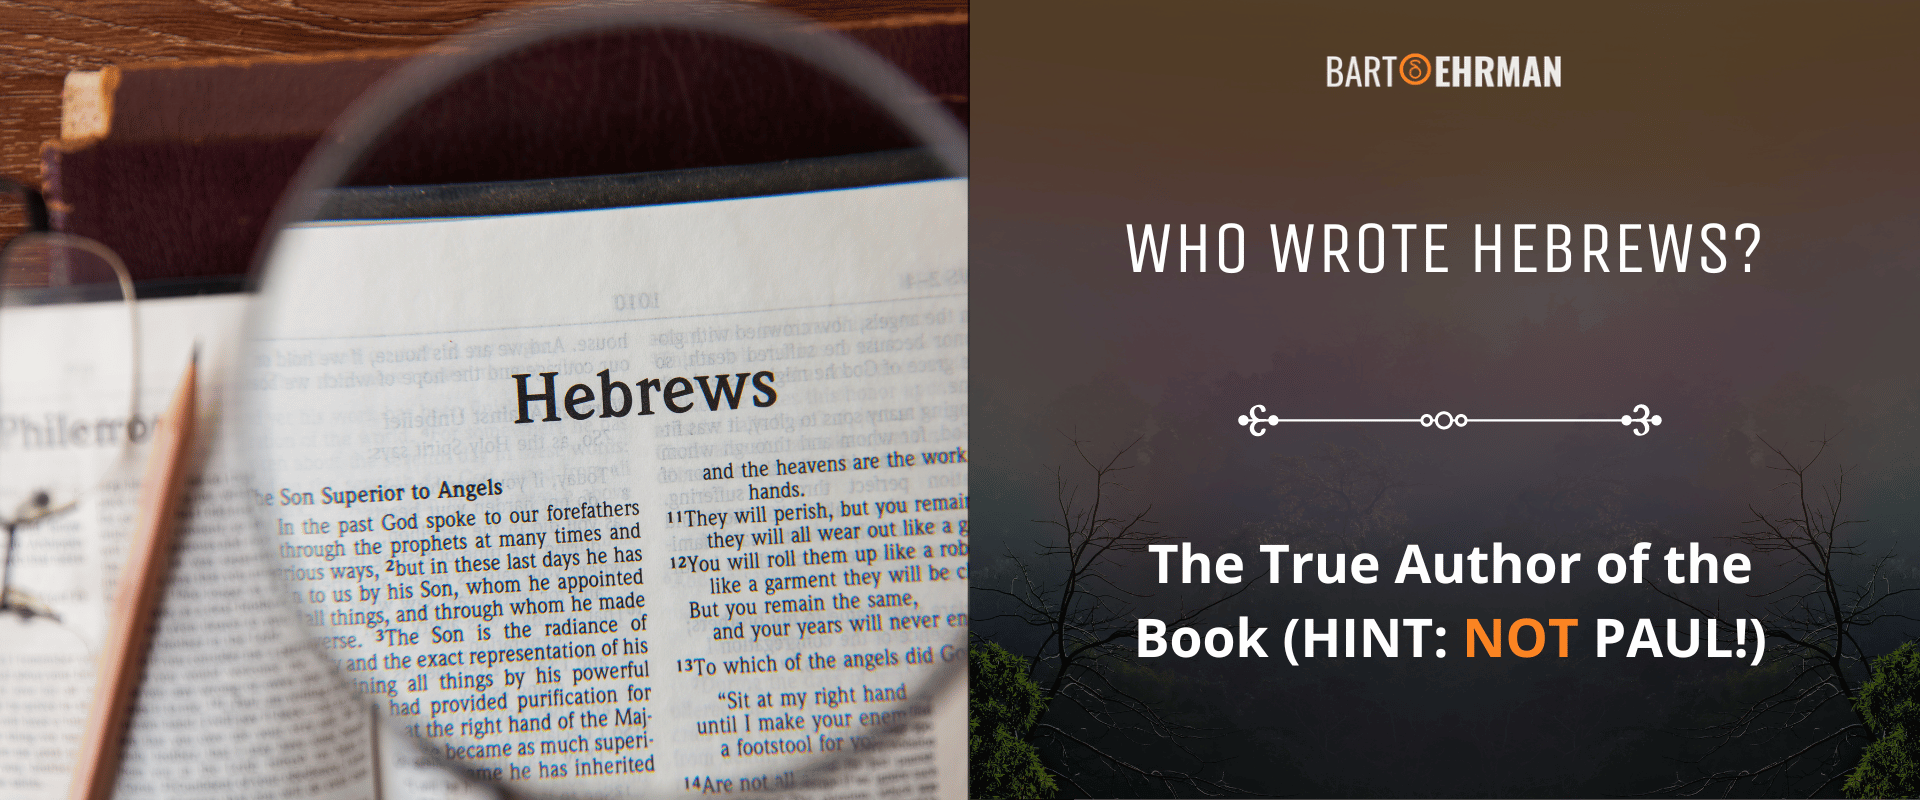 Who Wrote Hebrews_ The True Author of the Book